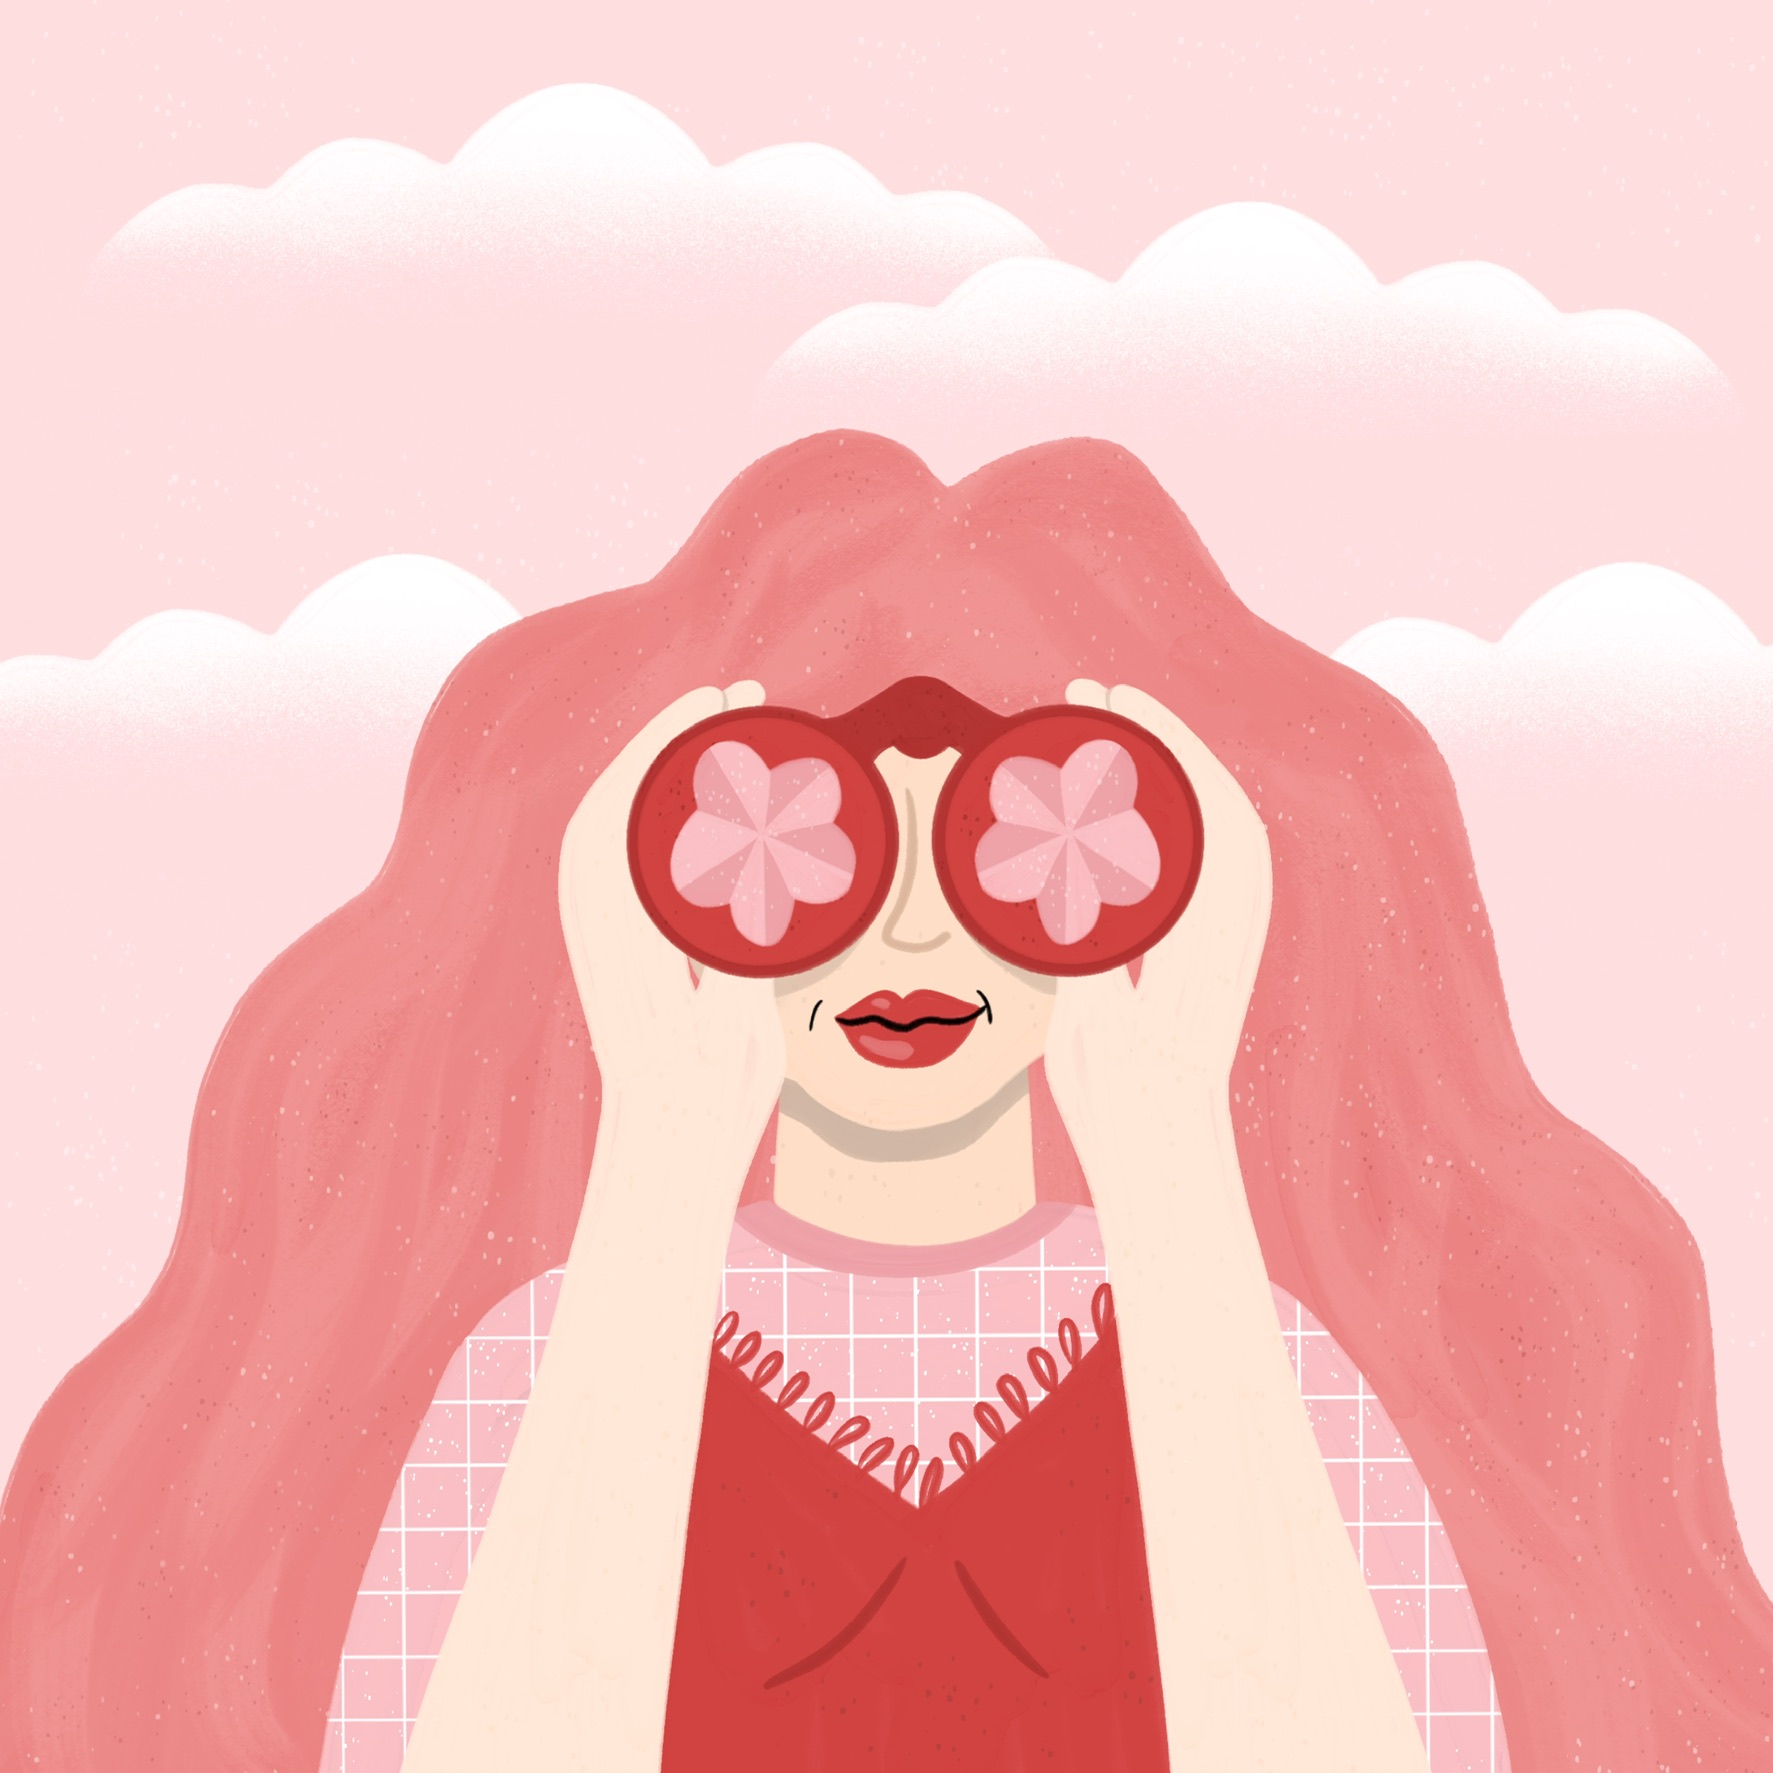 A head and shoulder portrait illustration of a young woman with red lips and long, thick, pink wavy hair, holding up a pair of red binoculars with pink flower-shaped lenses. She is dressed in a red frilly top over a pink checked blouse and is looking straight ahead. The background consists of white fluffy clouds in a pink sky.